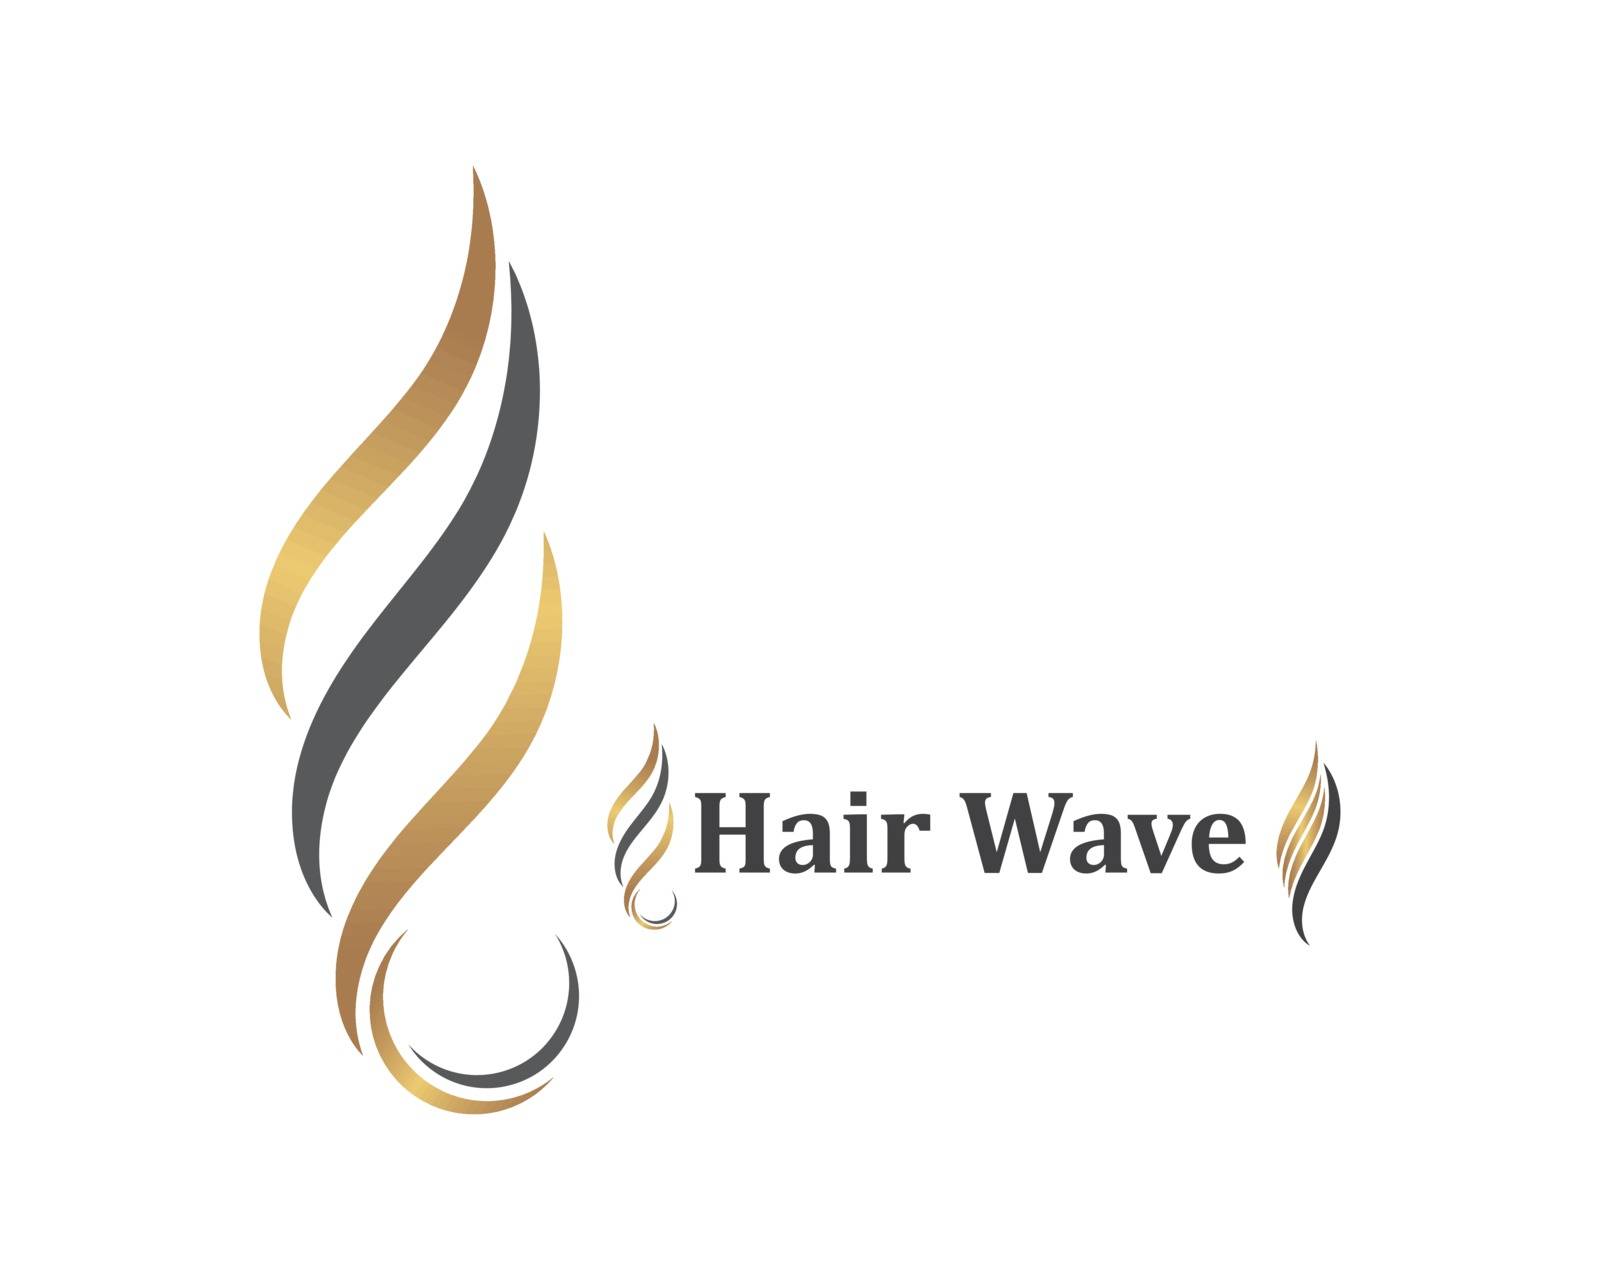 hair wave icon vector illustratin design symbol of hairstyle and salon template